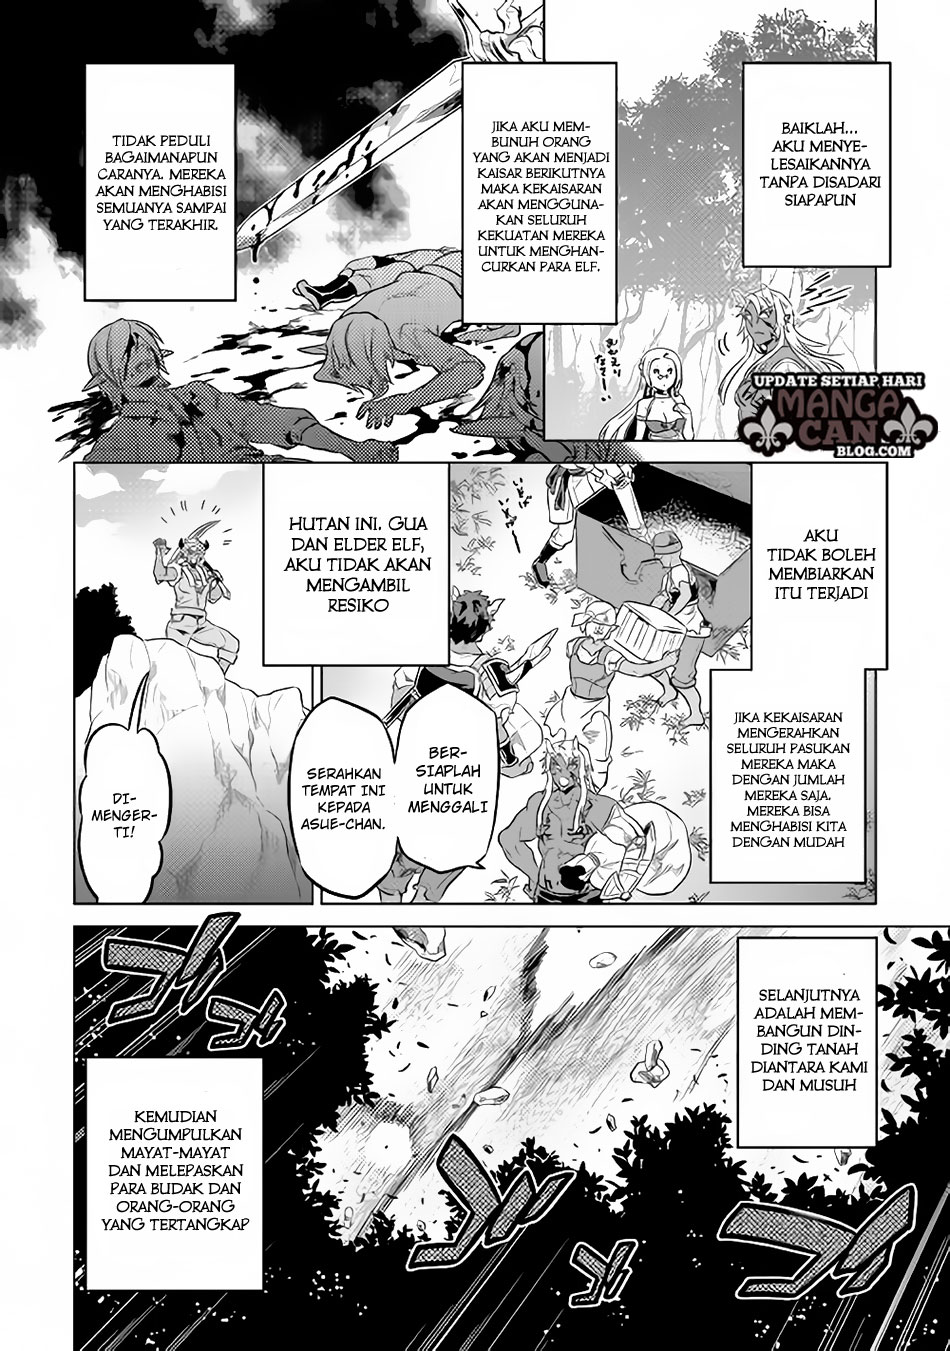 Re:Monster Chapter 34